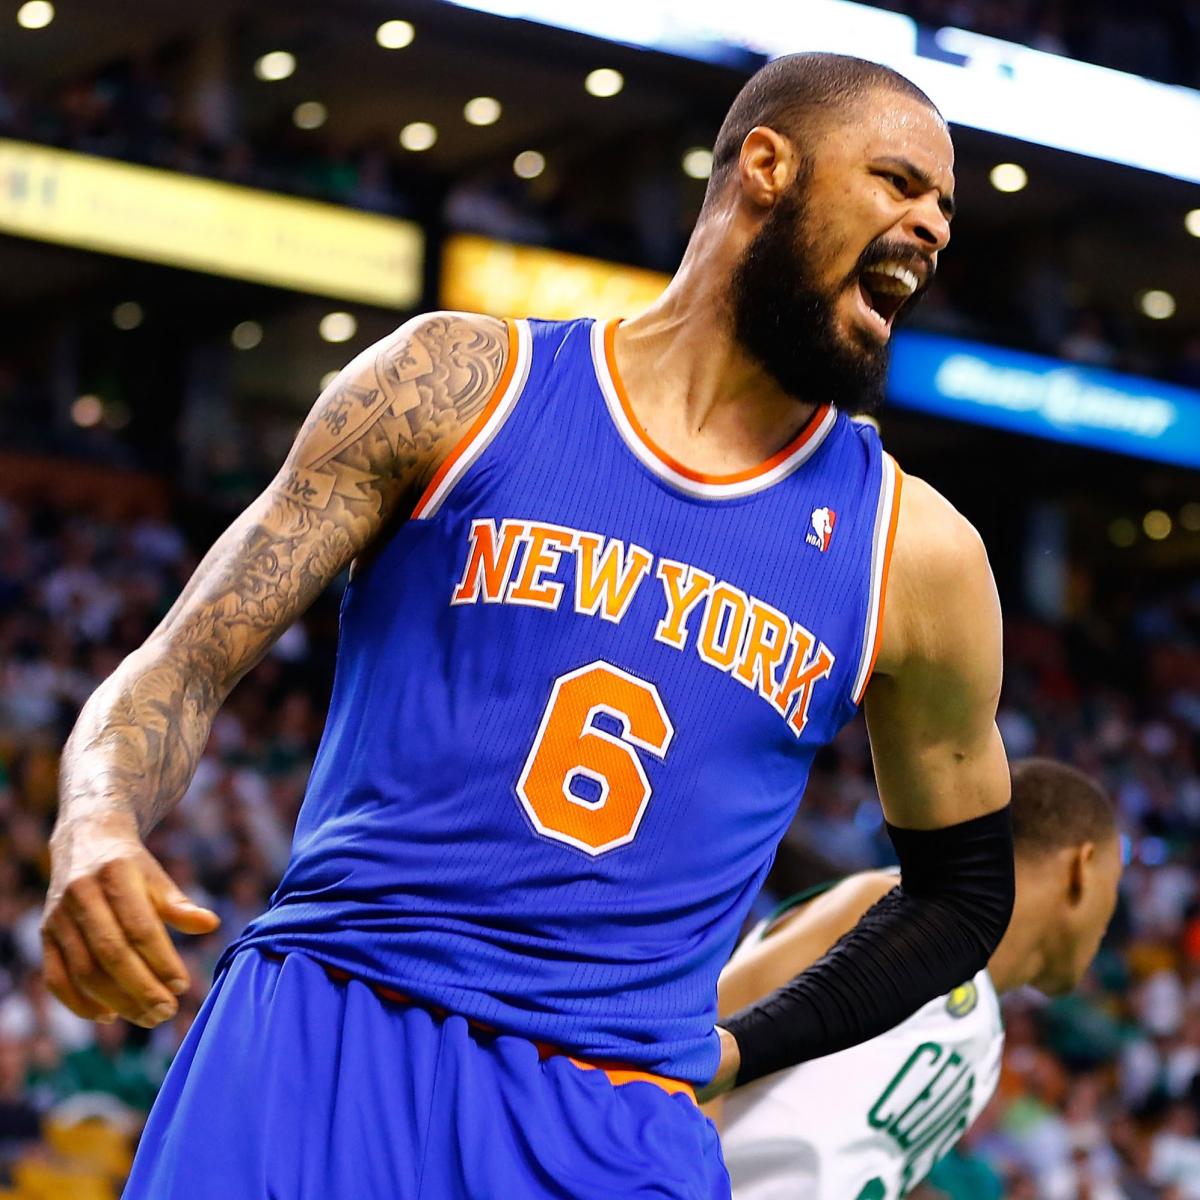 New York Knicks Tyson Chandler has his jersey pulled down while